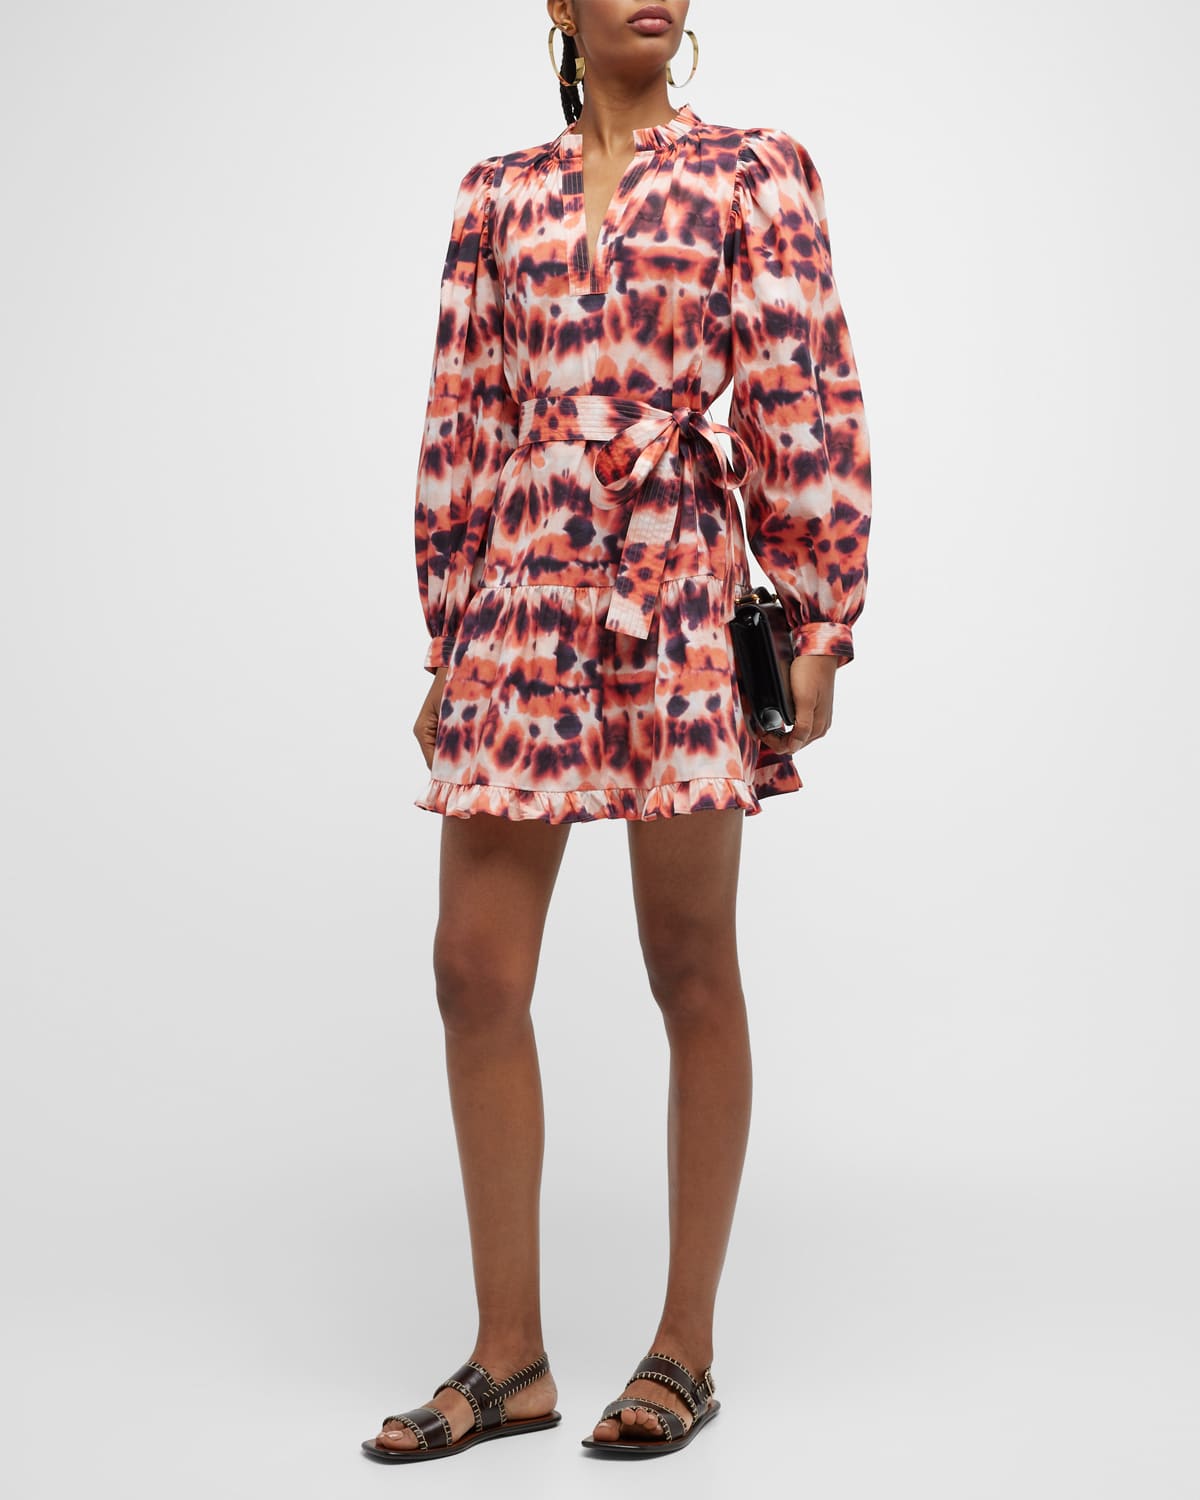 Marie Oliver Nella Abstract-Print Blouson-Sleeve Dress